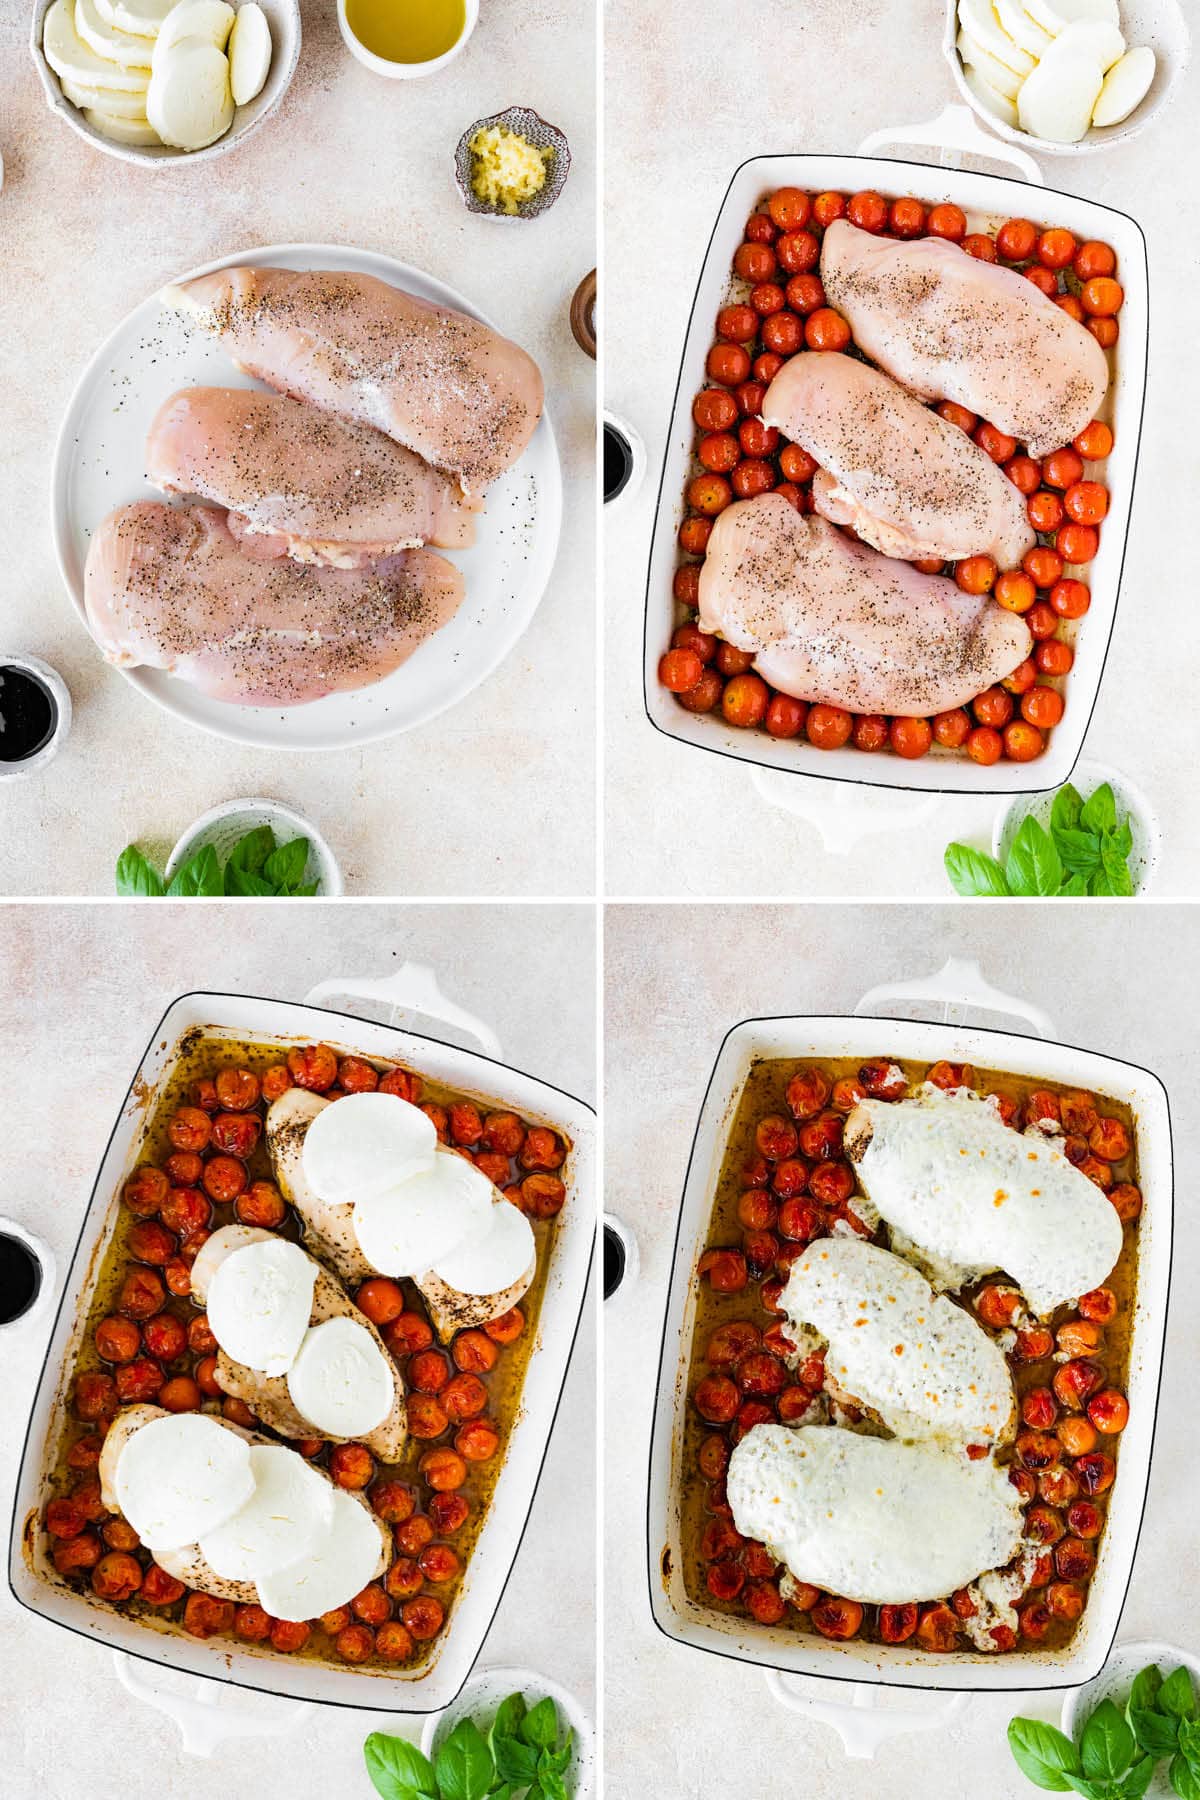 Collage of four photos showing the steps to make Baked Caprese Chicken: adding chicken and tomatoes to a baking dish, baking and then adding mozzarella and melting it.